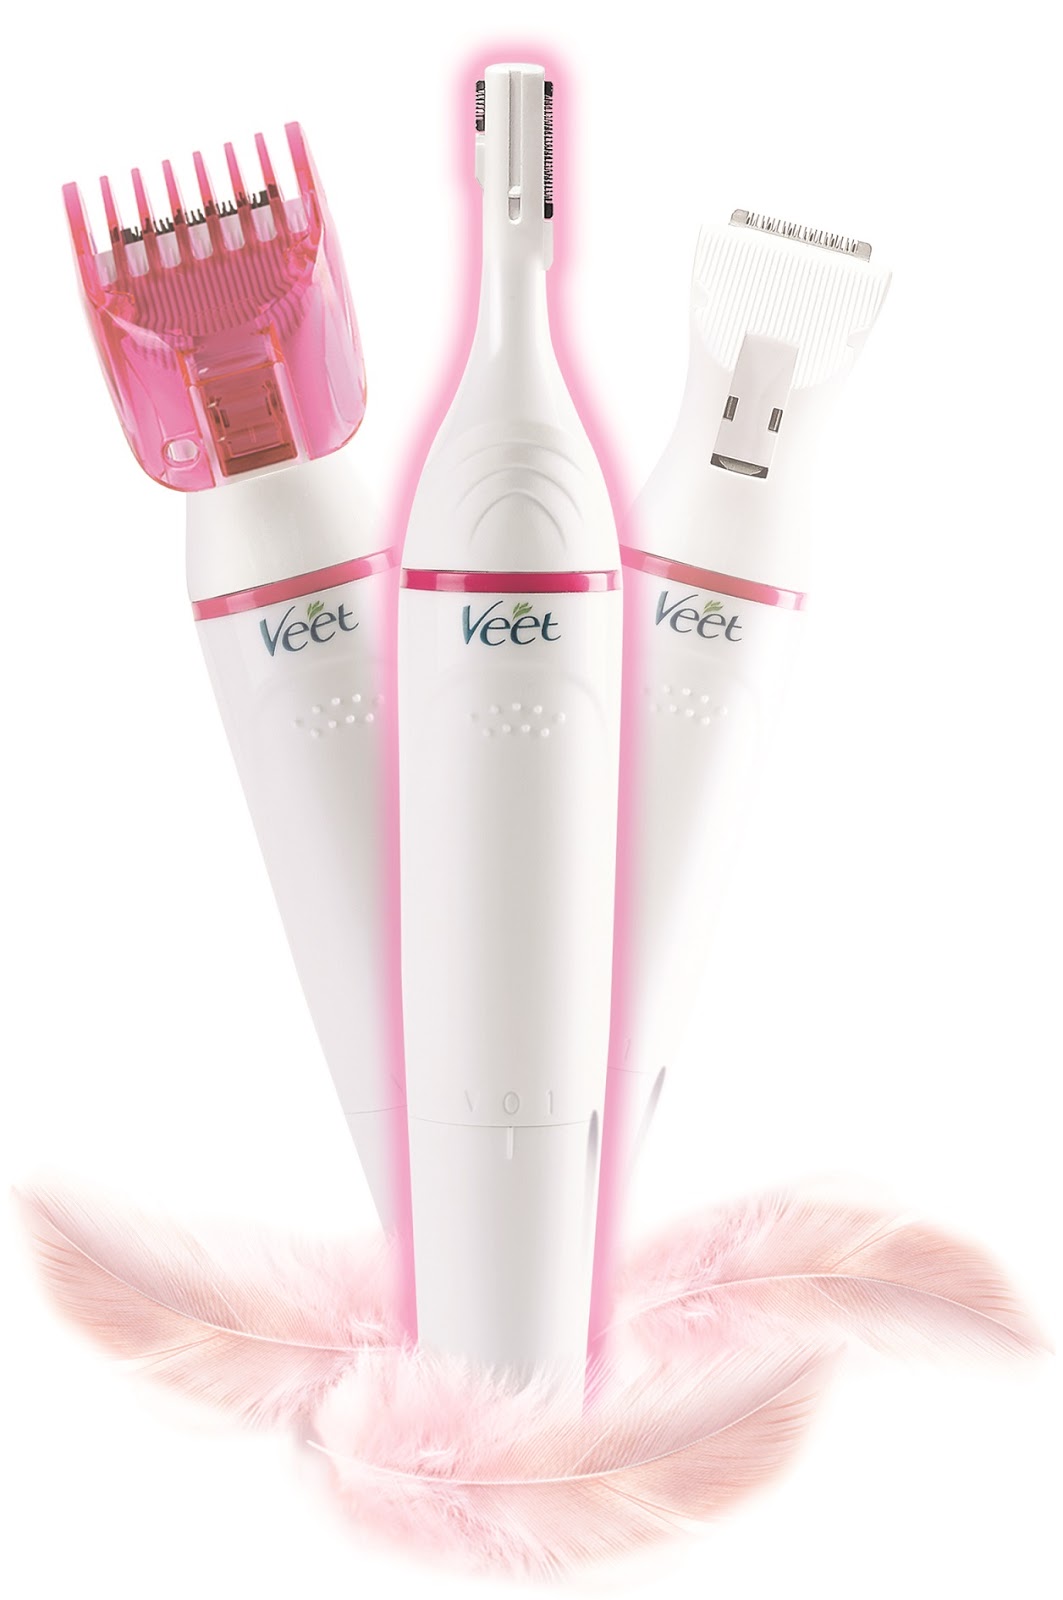 Veet Sensitive Touch™ Beauty Trimmer Makes Hair Trimming Easy